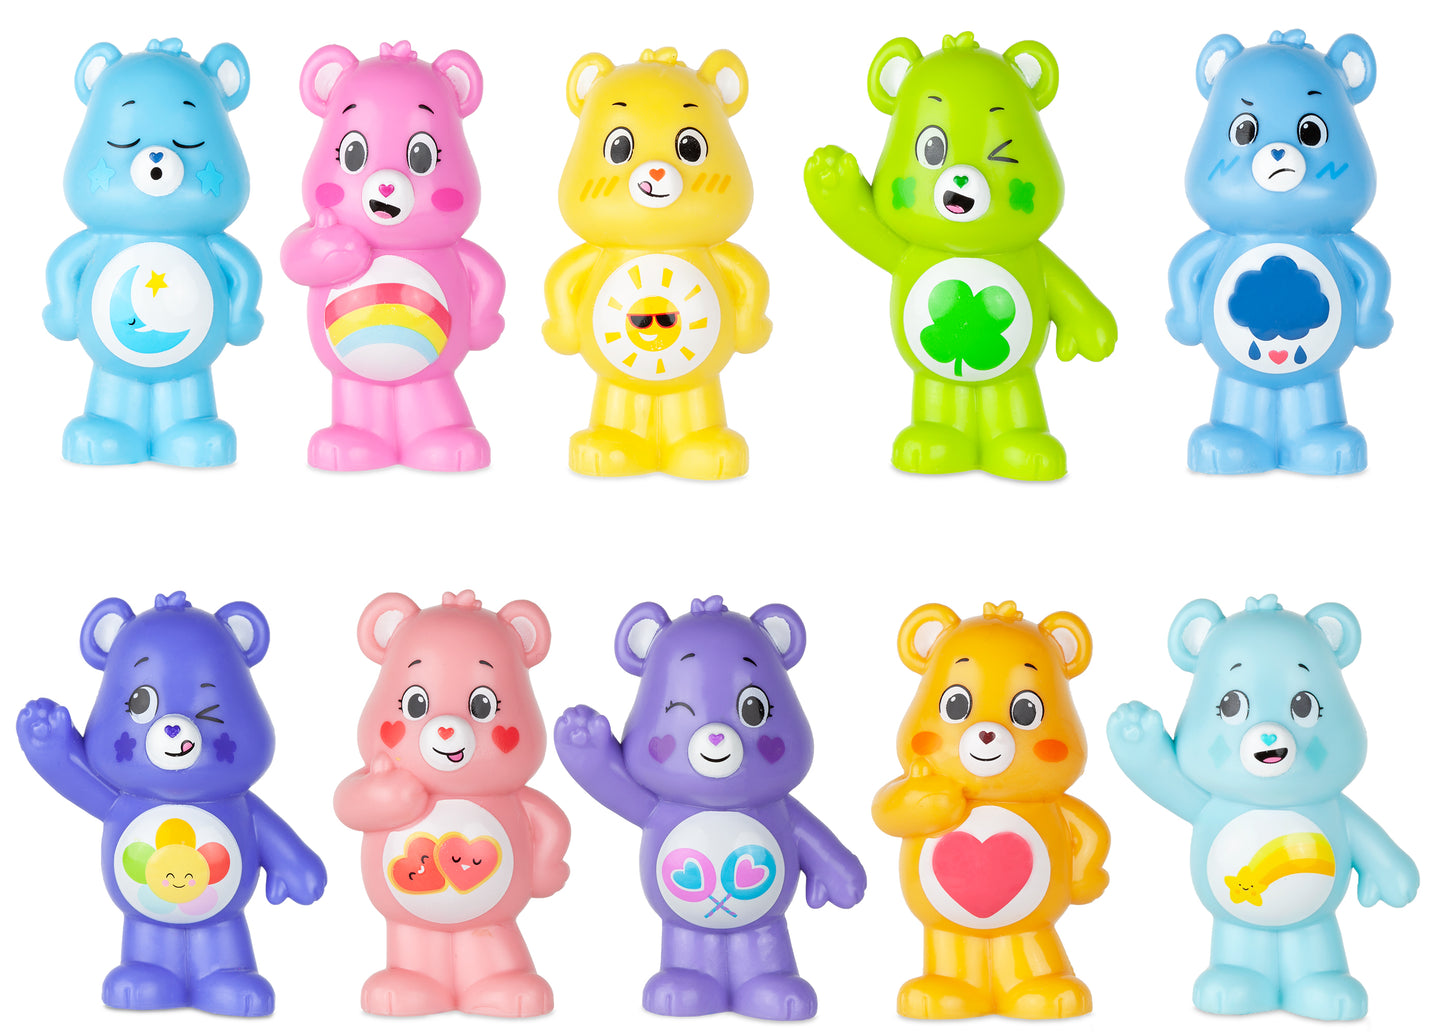 Care bears Surprise collectible figure